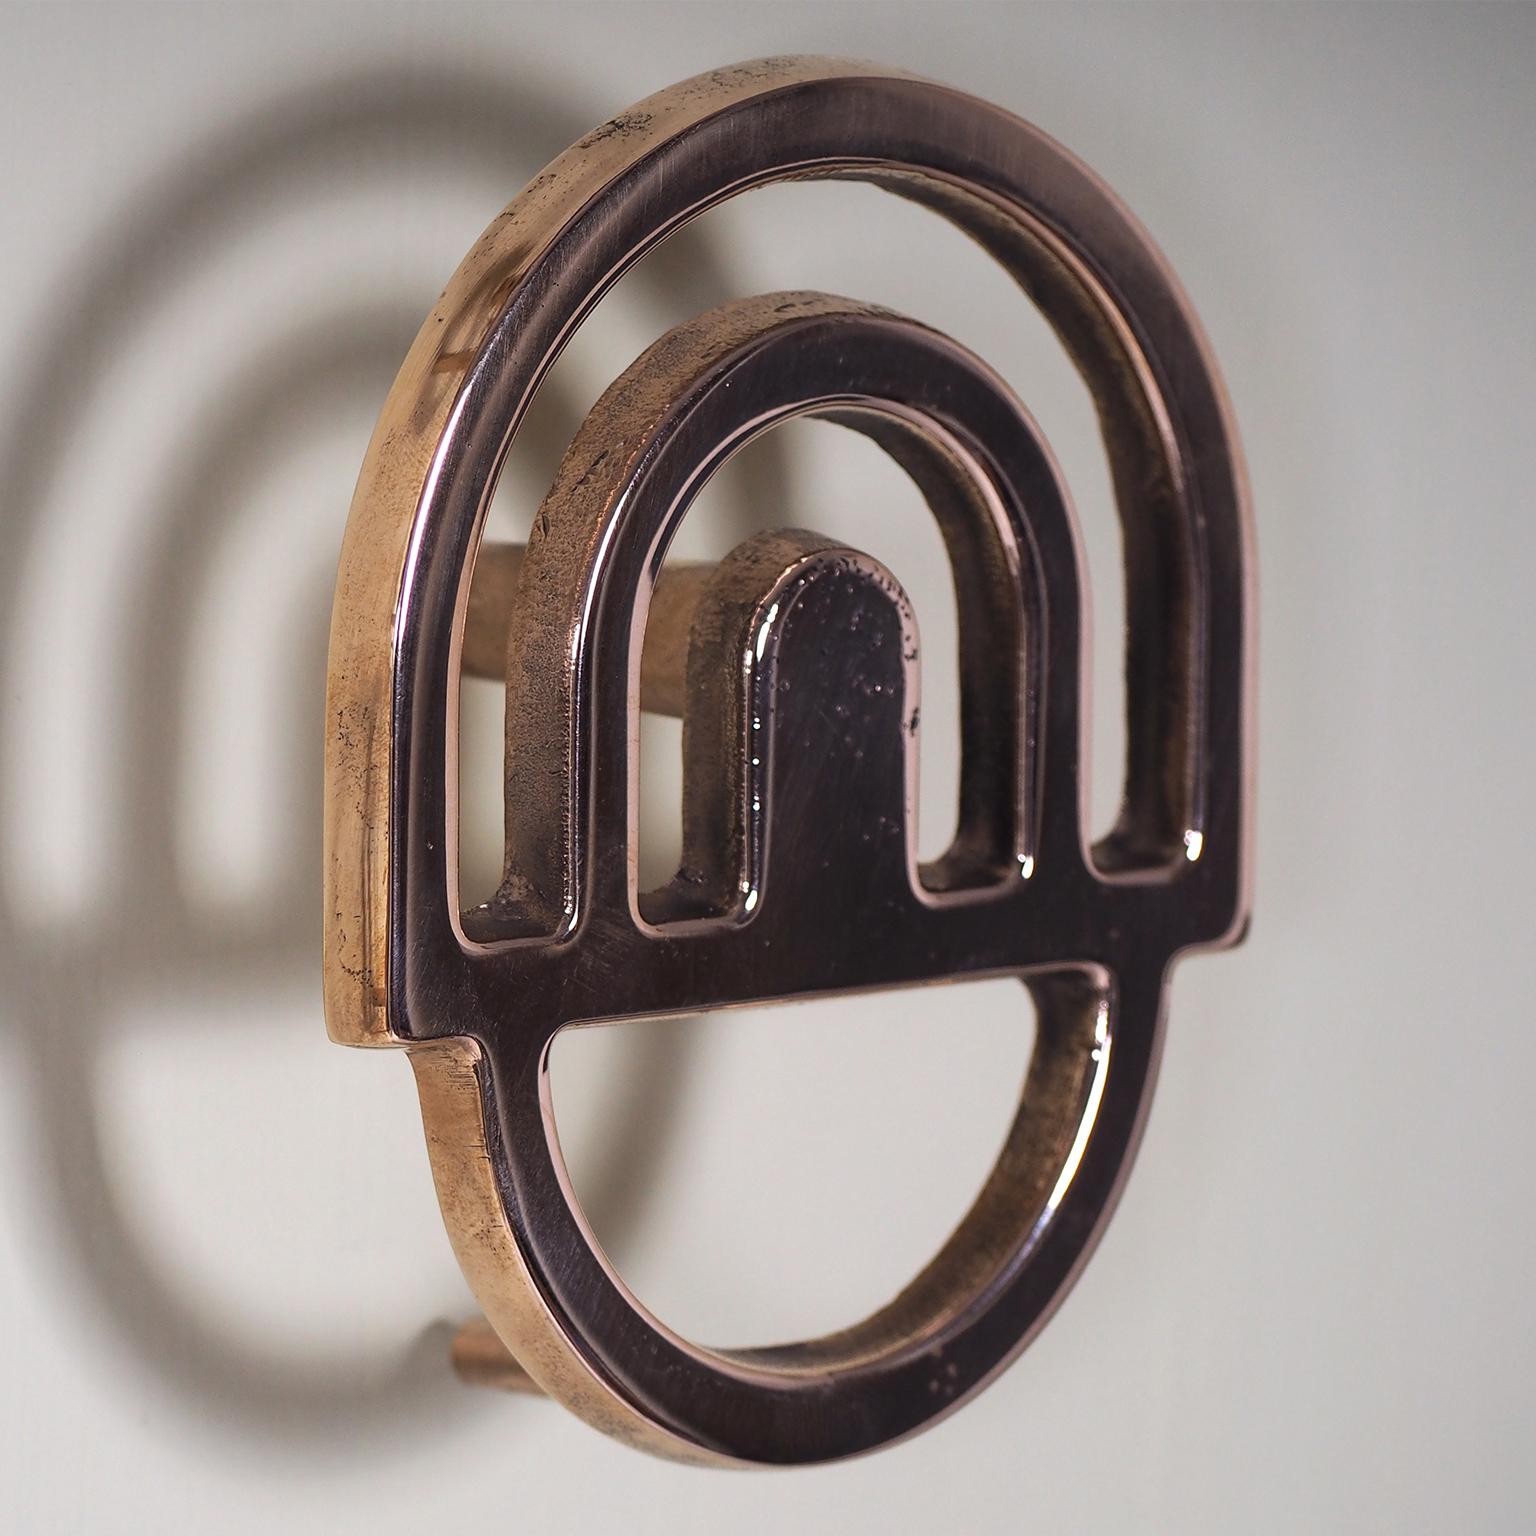 Set of 2 solid bronze hooks
Designed by Alessandro Zambelli 
Made in Italy

Set of two casting bronze wall hooks that reminds to the architecture of the early 1900. A contrast between the severity of geometric structure and imperfection of bronze